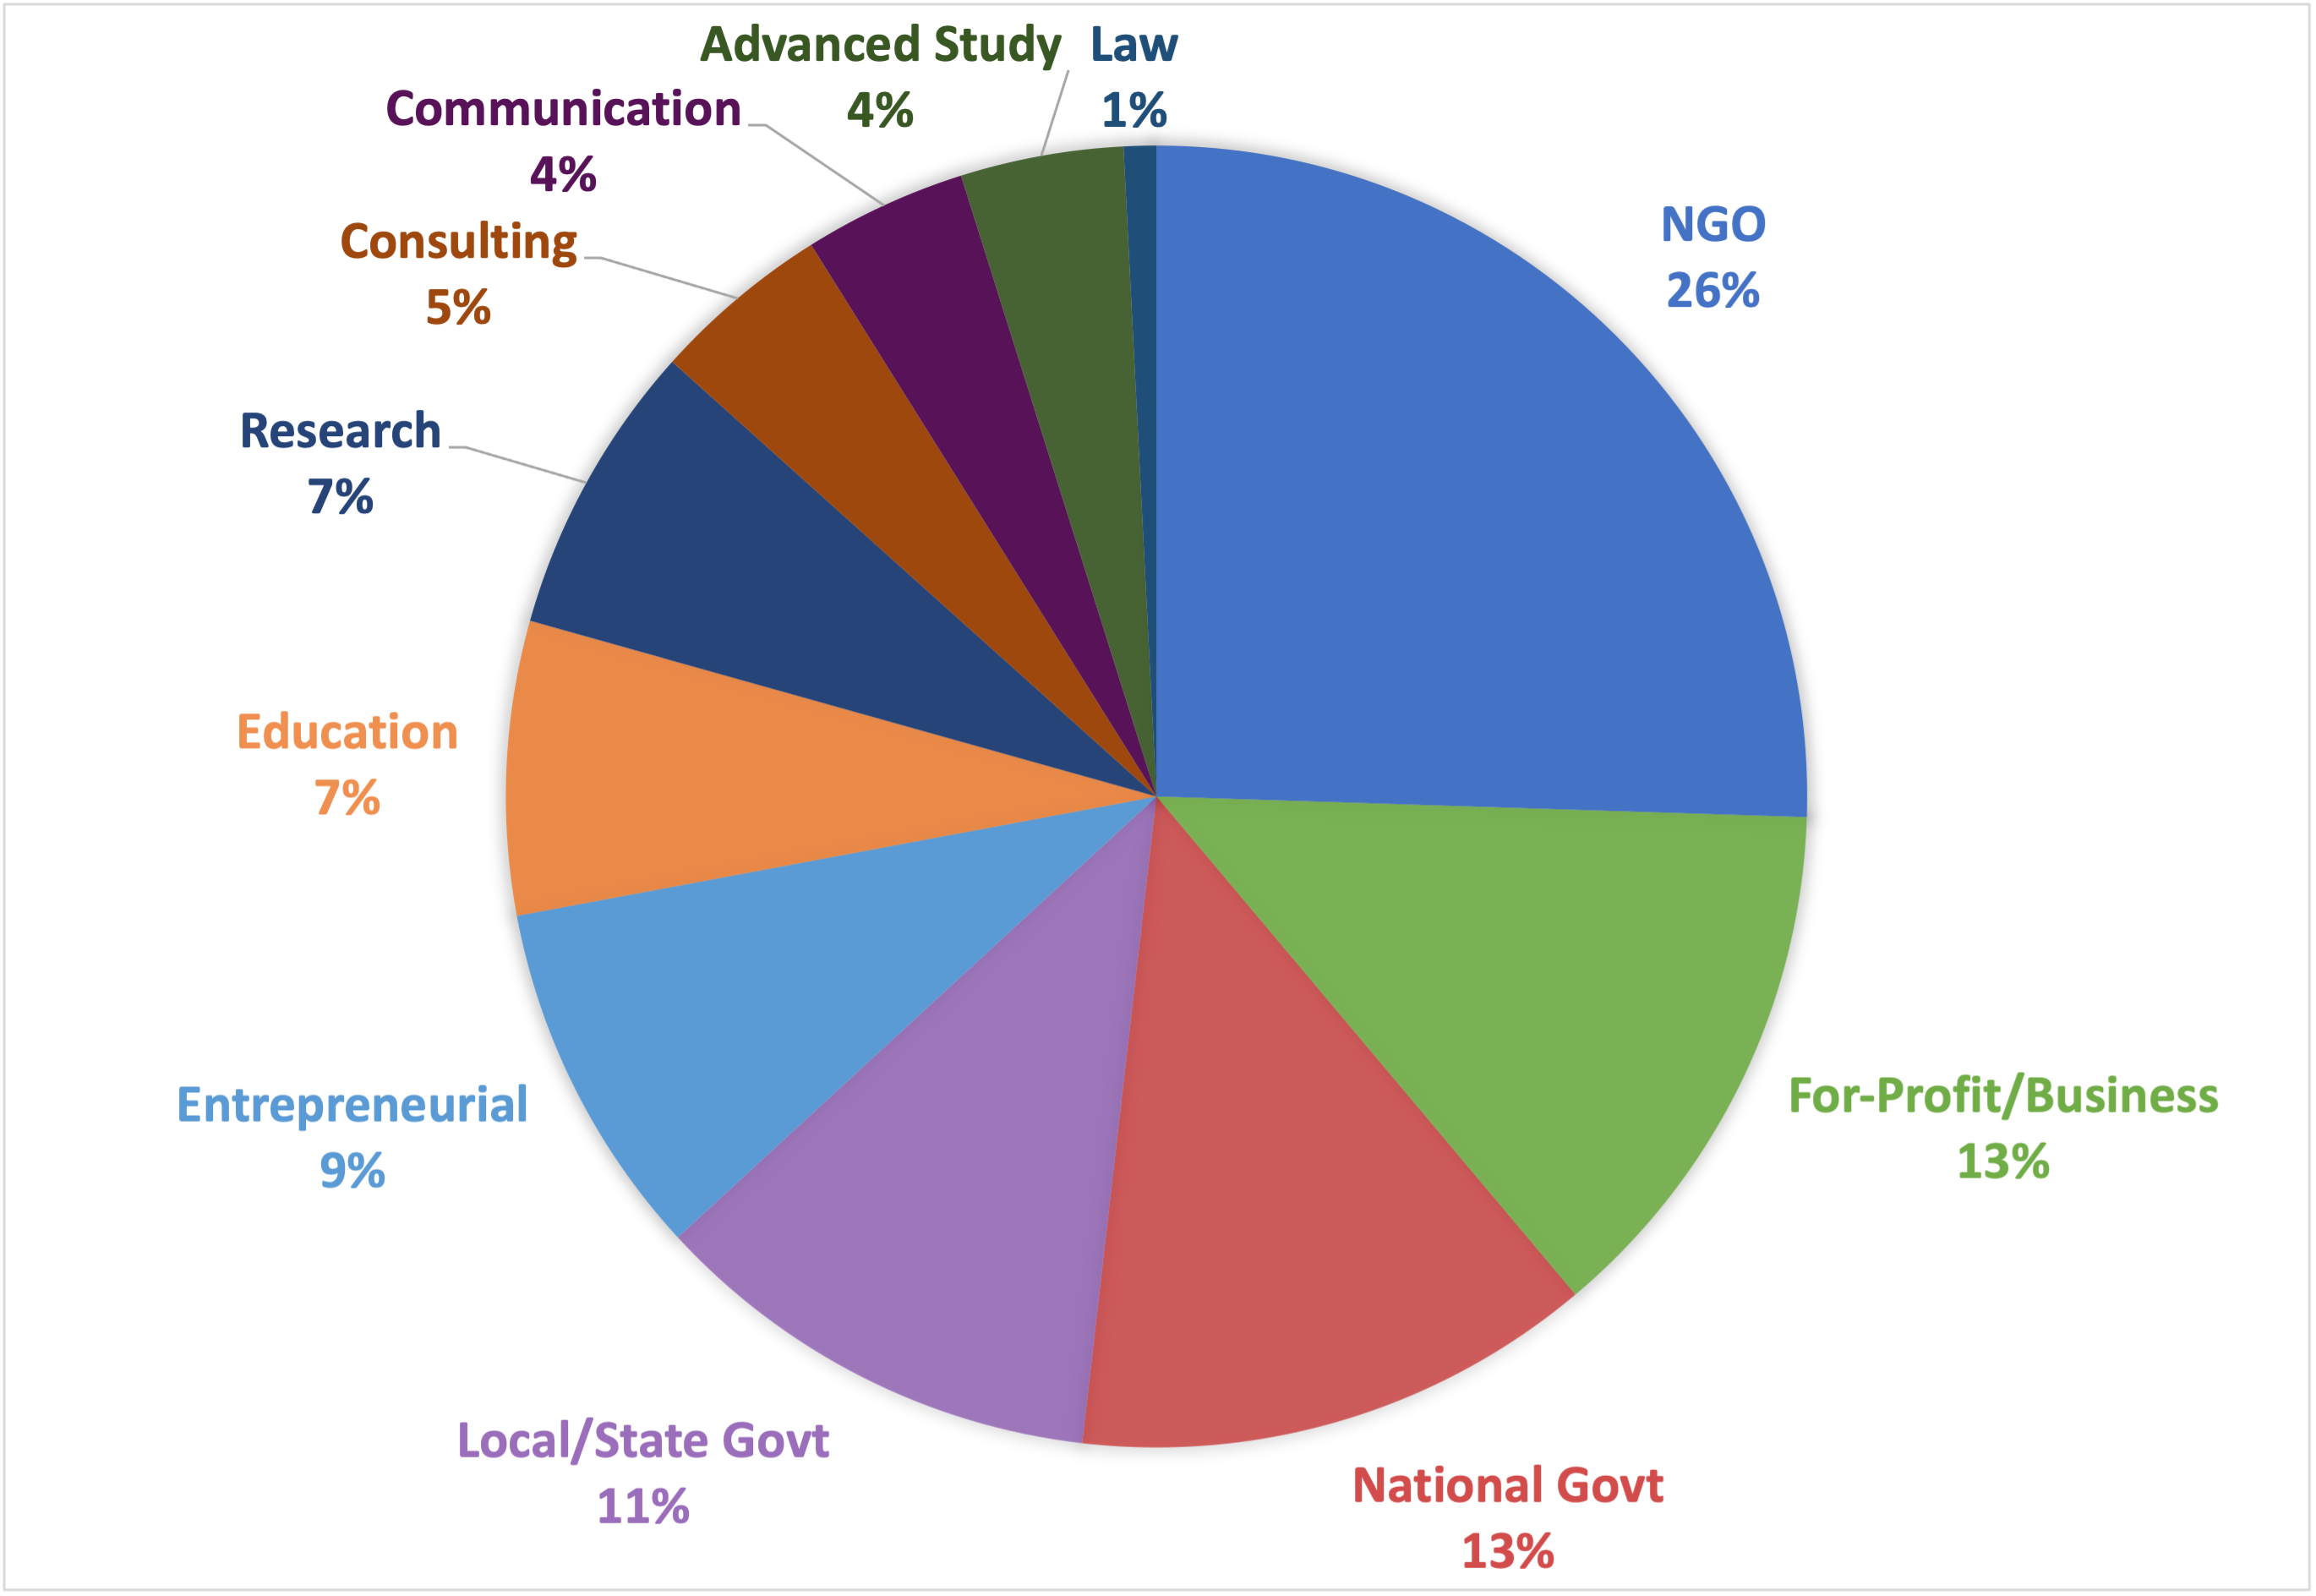 Pie chart of alumni employment by sector